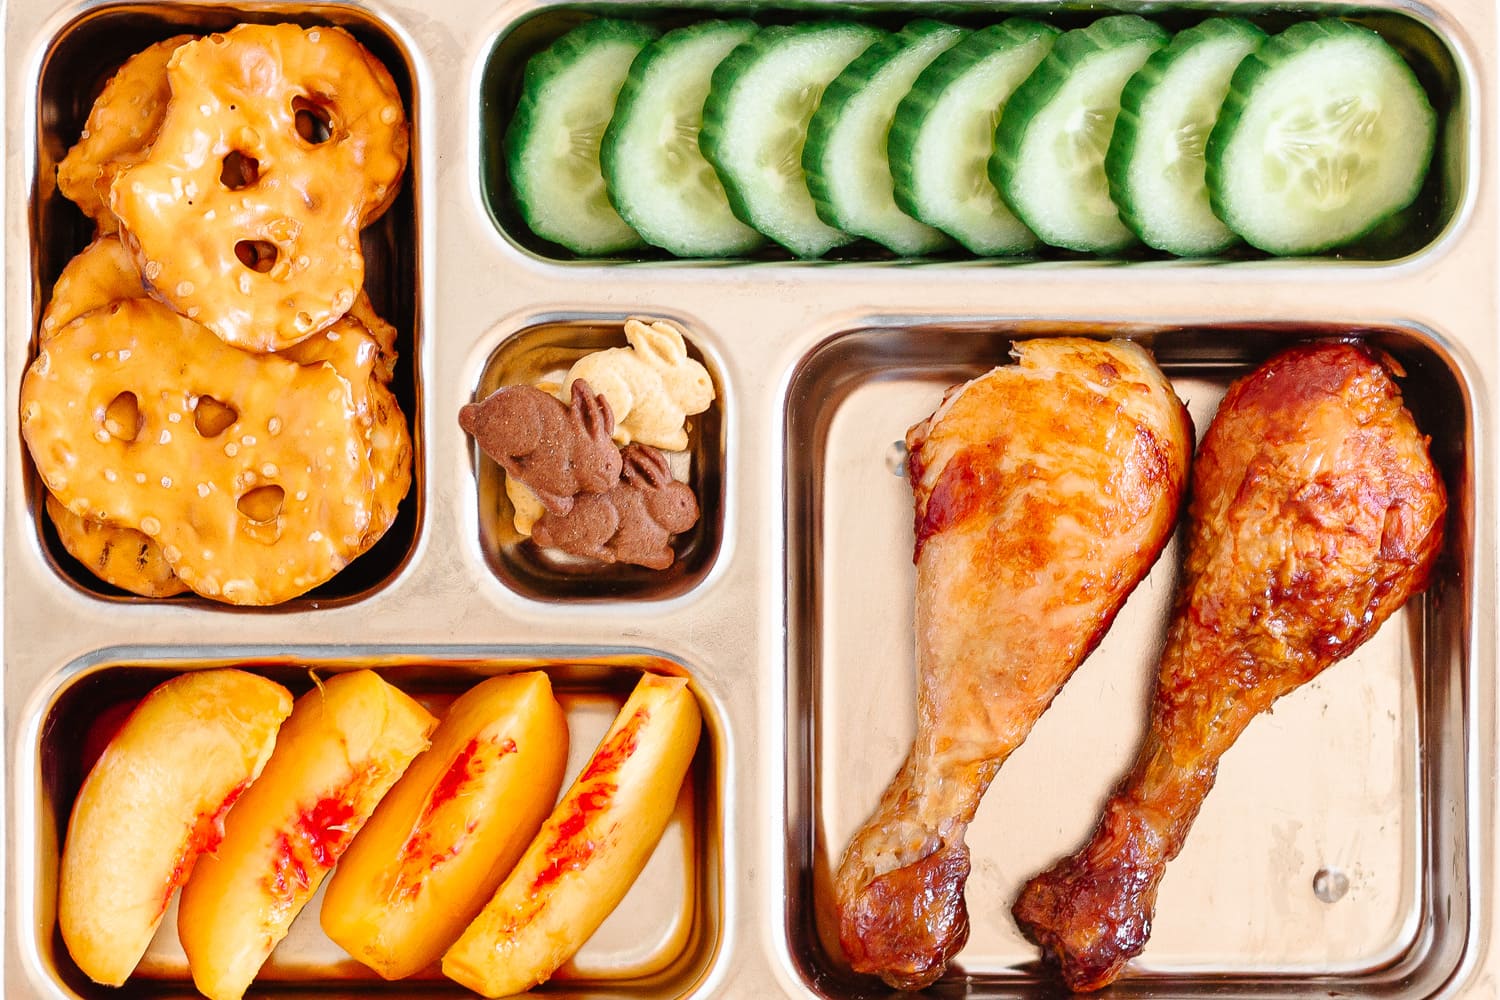 Kids bento lunch box with two roasted chicken drumsticks, cucumber slices, peach slices, pretzel crackers and small bunny shaped cookies.